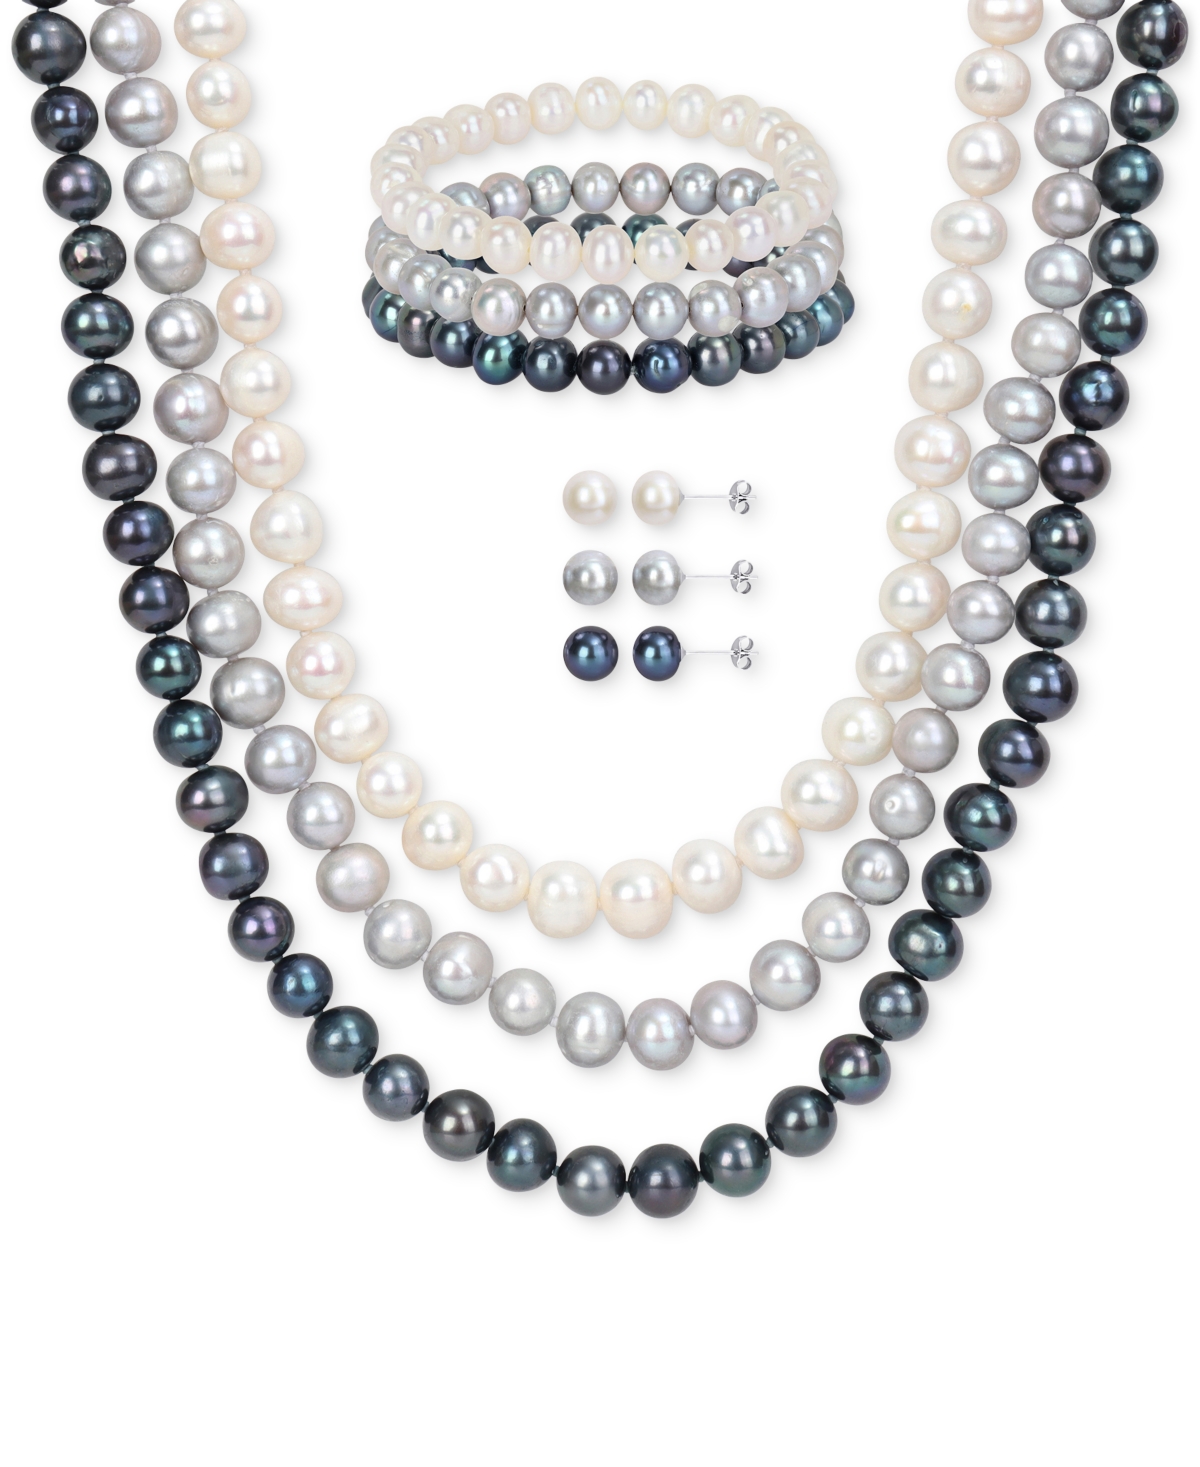 Macy's 7-pc. Set White, Black, & Gray Cultured Freshwater Pearl (7-1/2